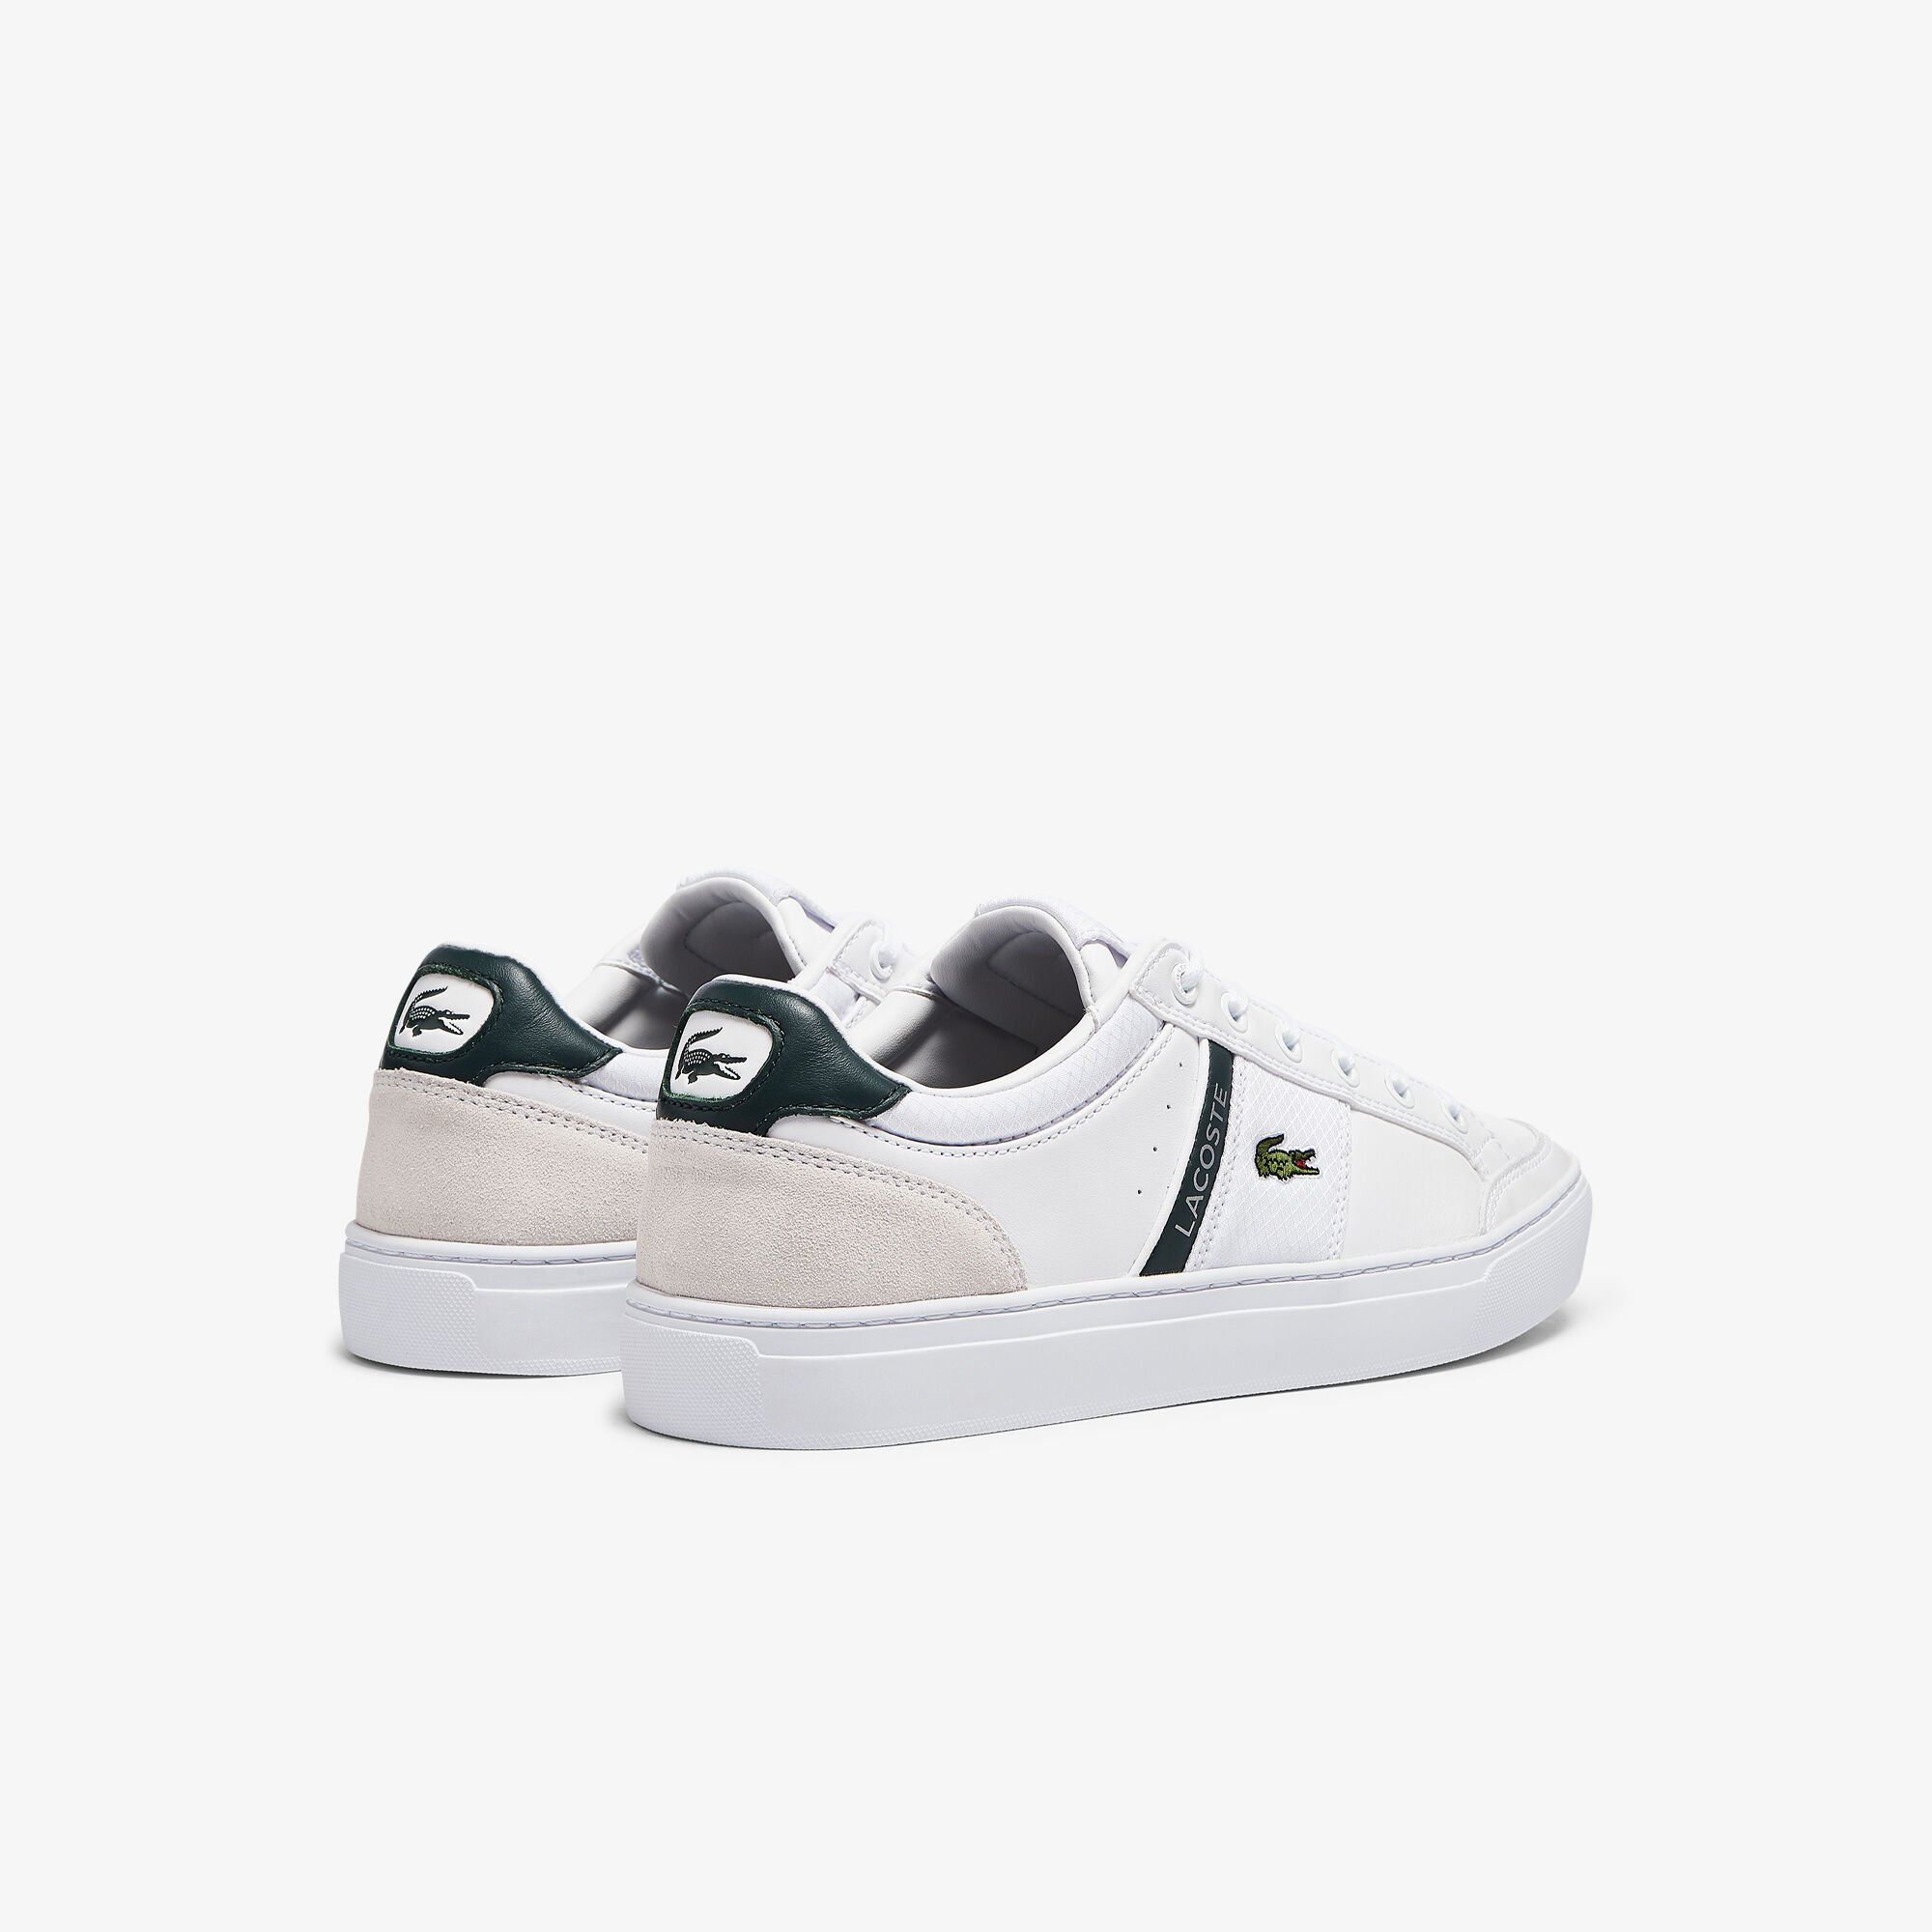 lacoste men's courtline leather sneakers